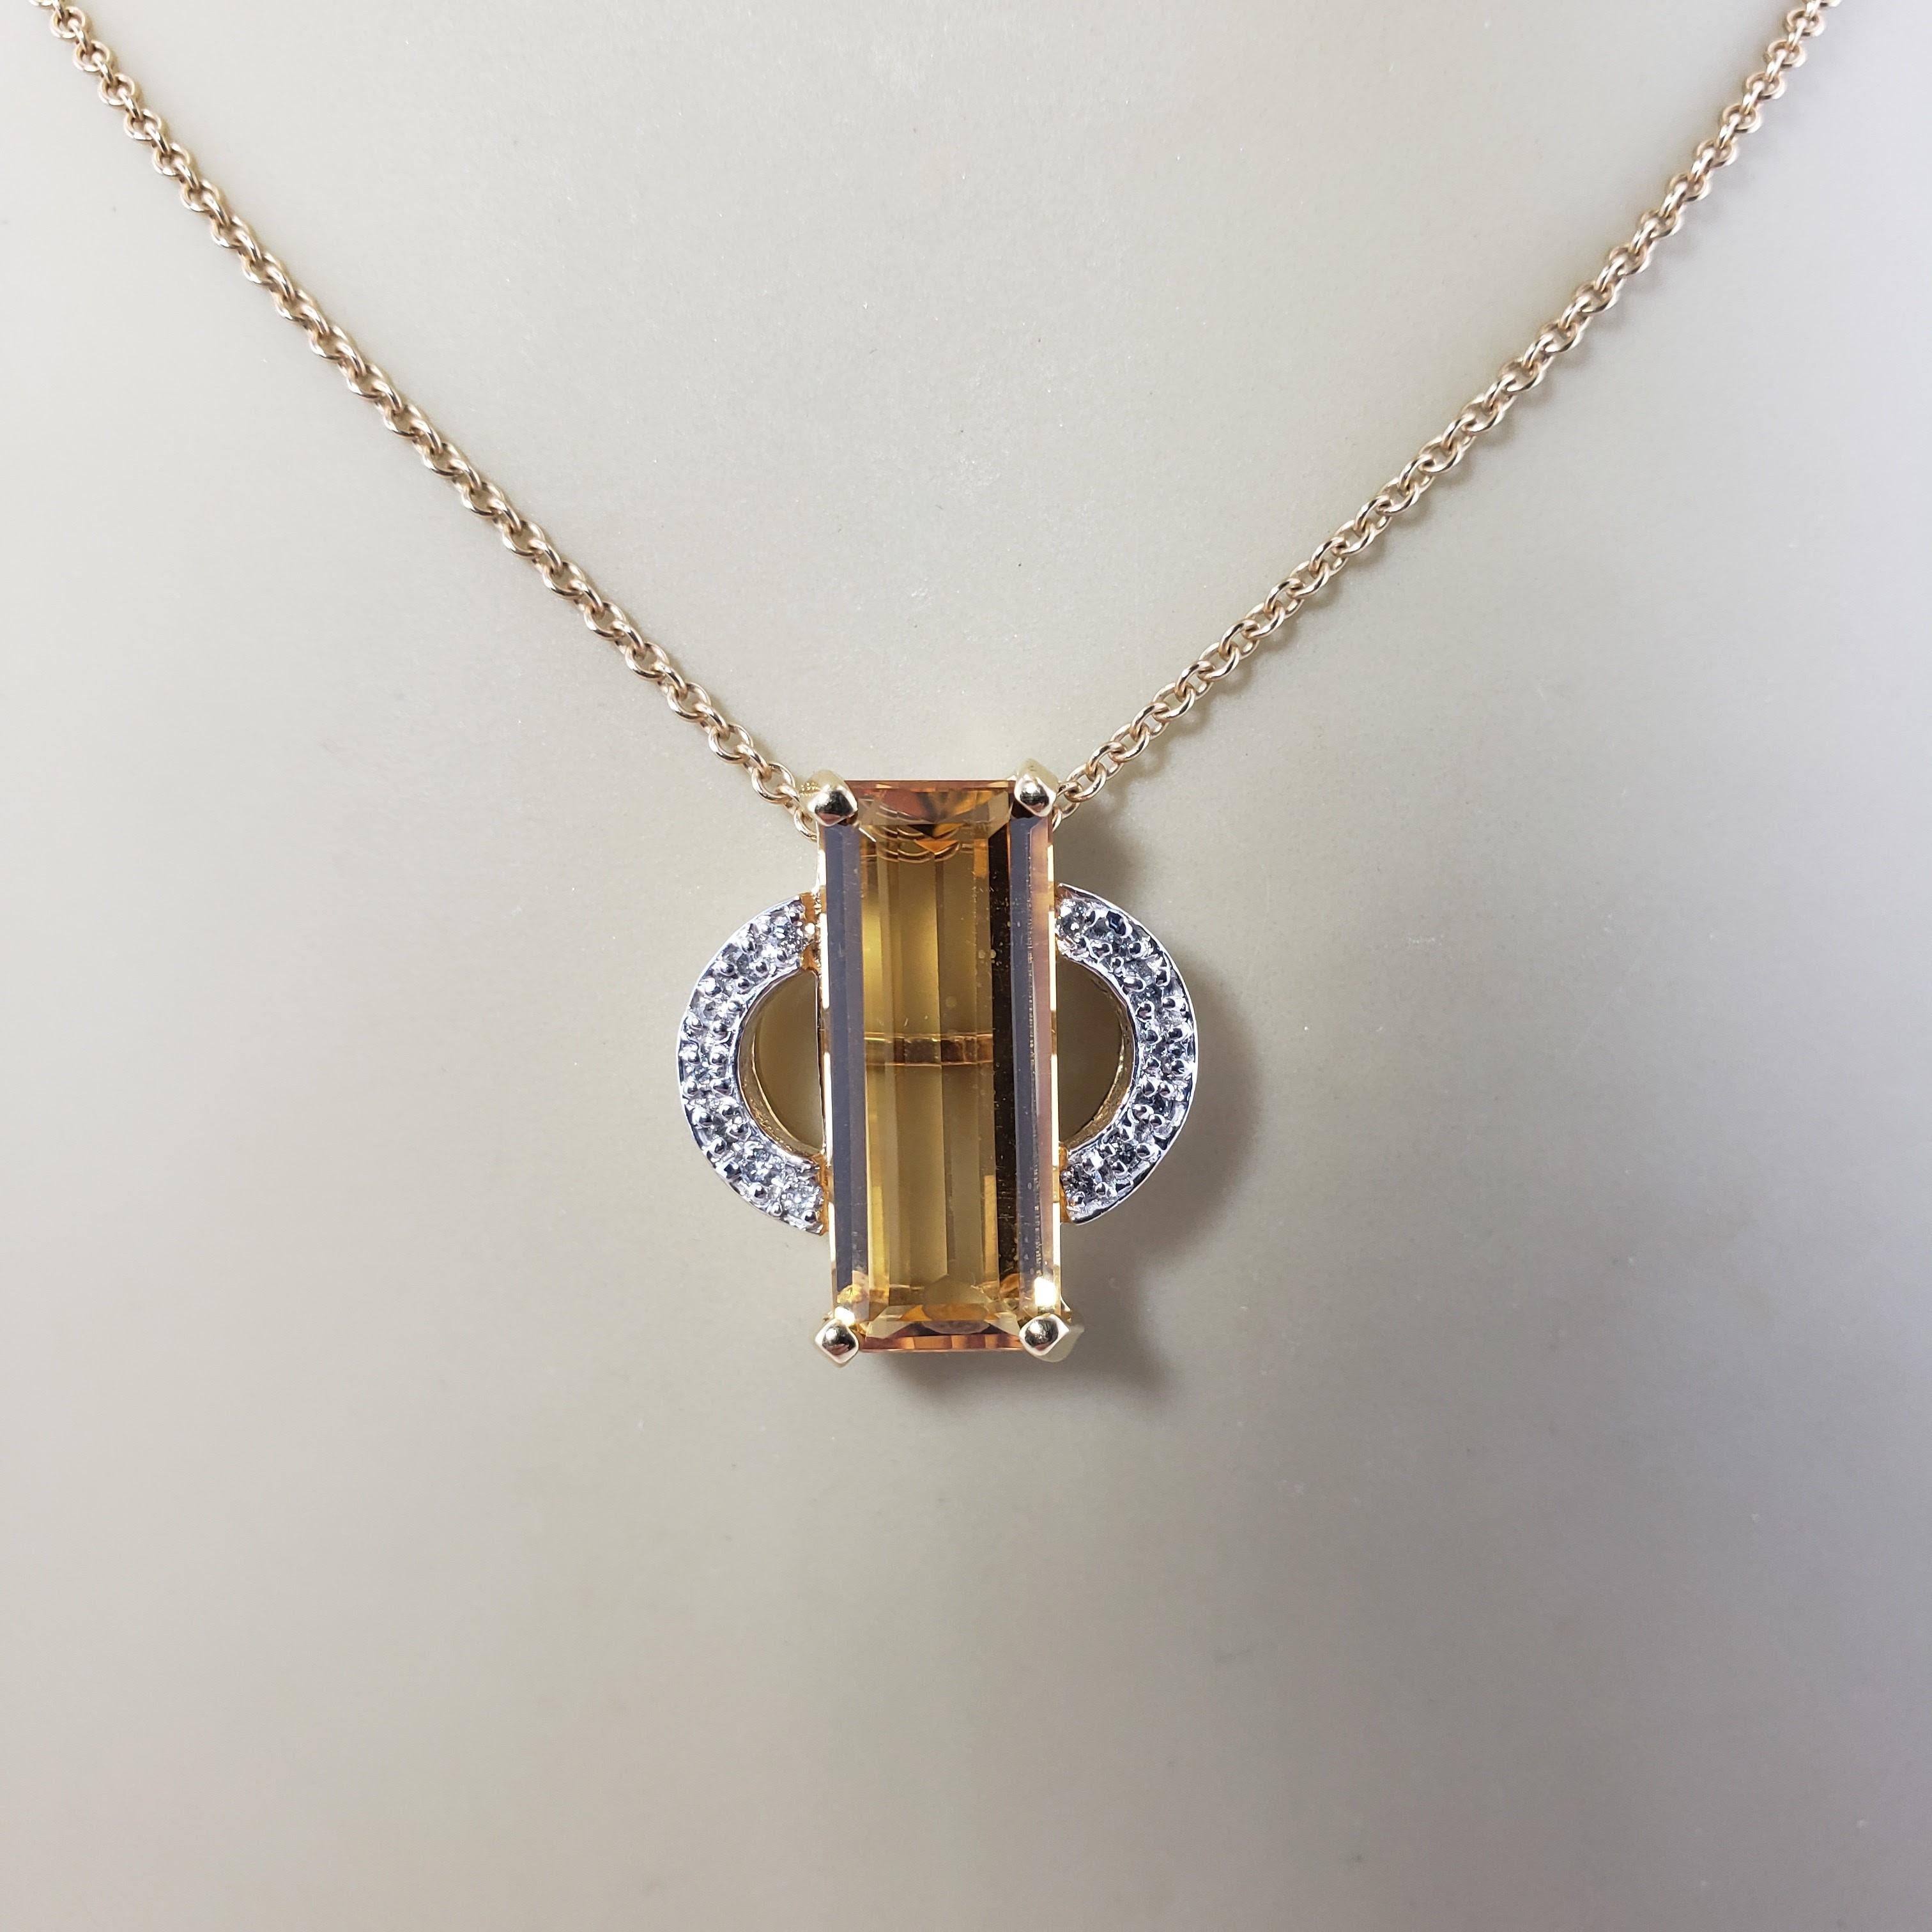 Vintage 14 Karat Yellow Gold Citrine and Diamond Pendant-

This lovely pendant features one citrine gemstone (20 mm x 8 mm) and 14 round brilliant cut diamonds set in classic 14K yellow gold.

Matching earrings: RL-00012886

Approximate total